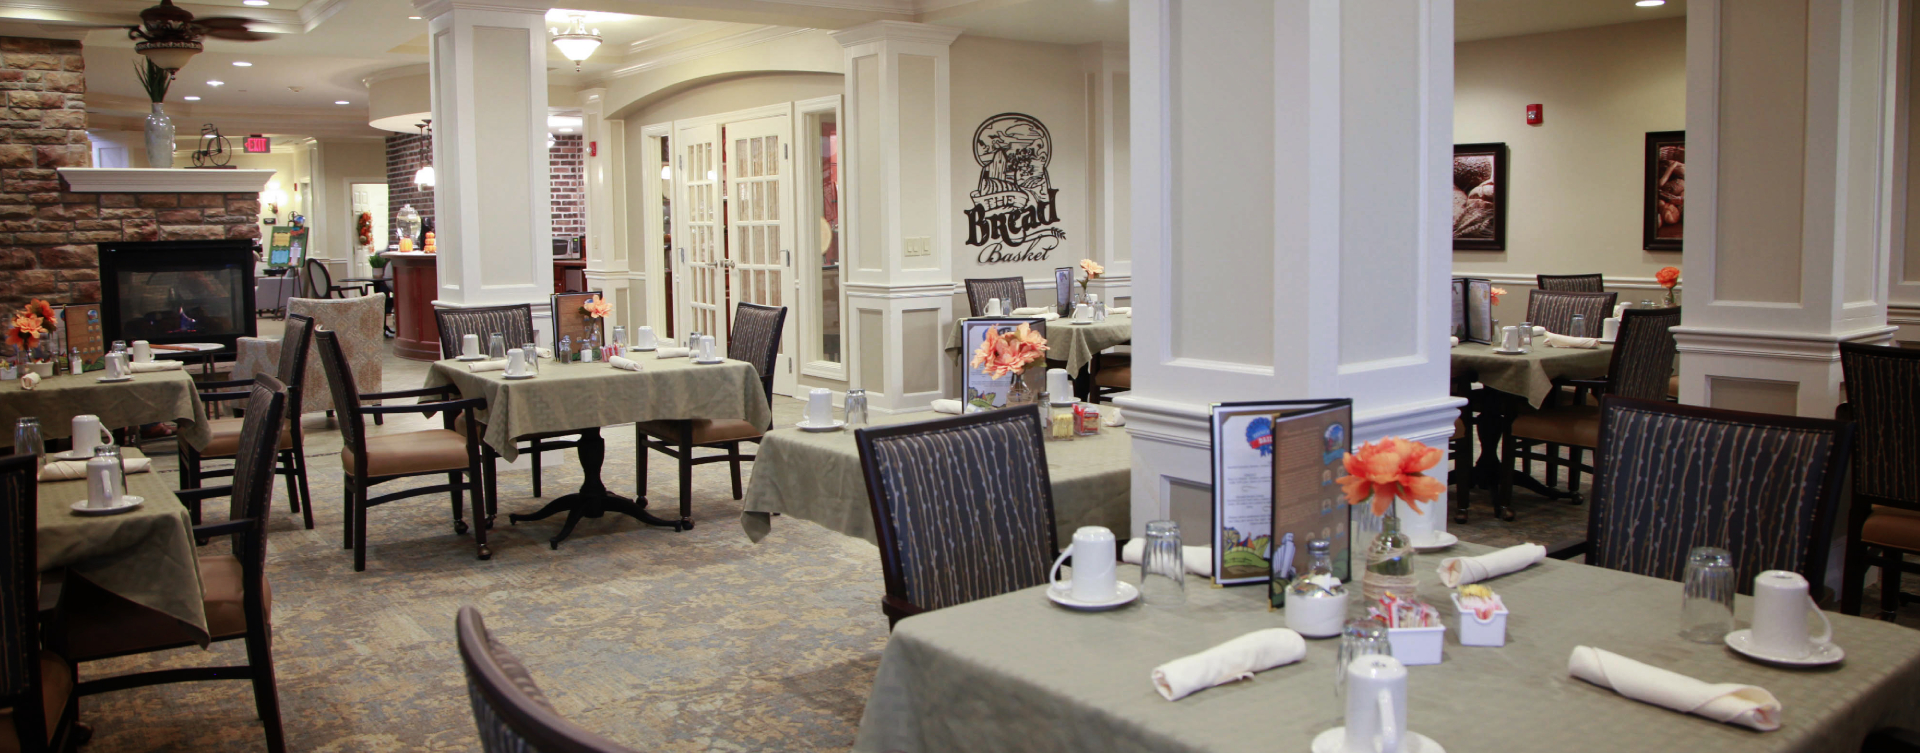 Enjoy restaurant -style meals served three times a day in our dining room at Bickford of St. Charles